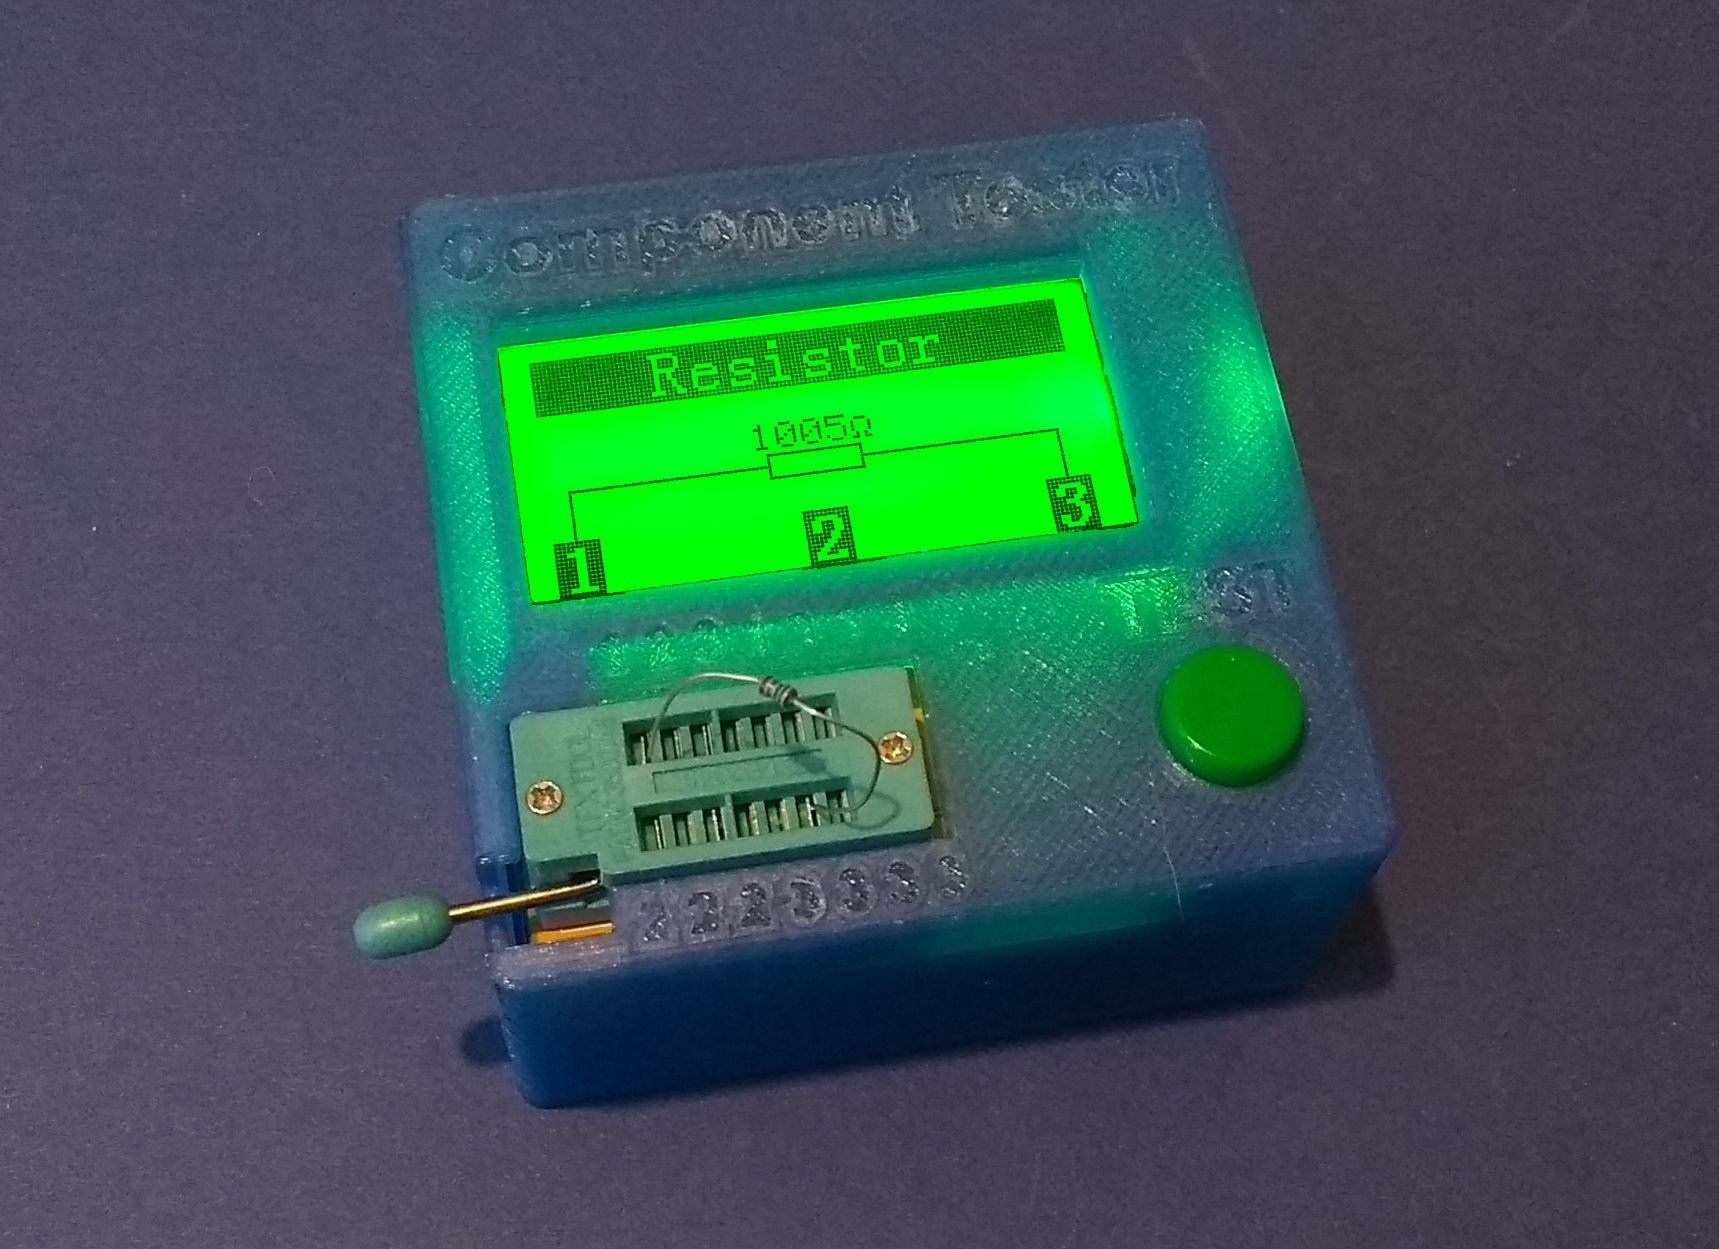 3D Printed Component Tester